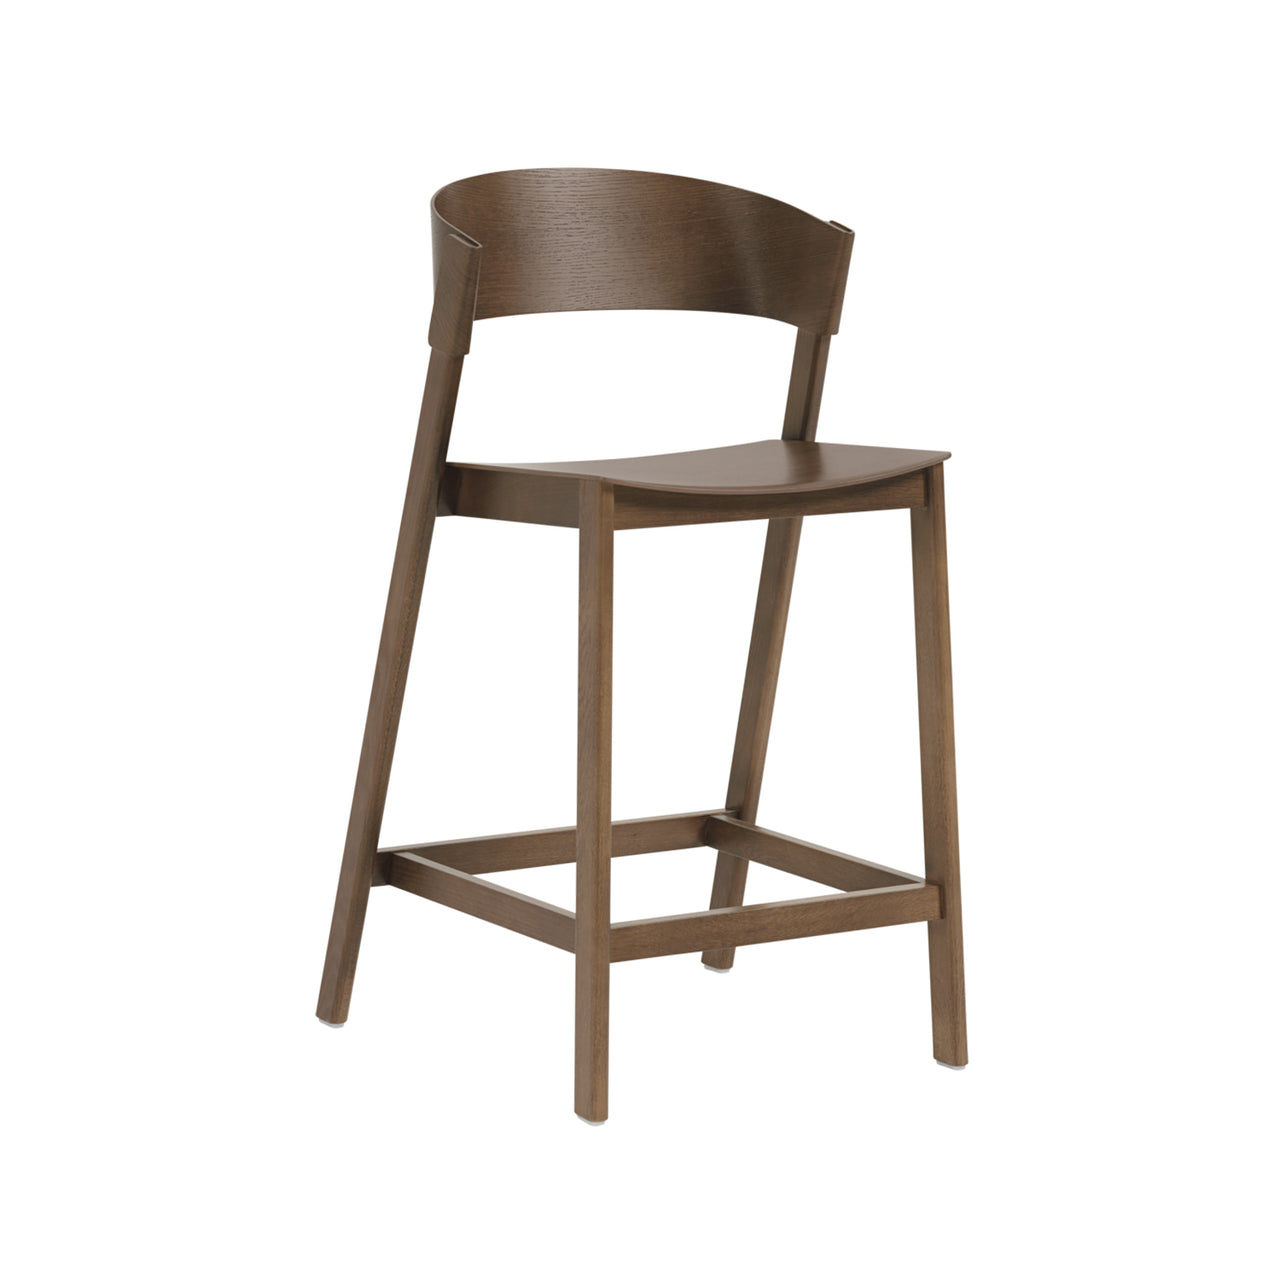 Cover Bar + Counter Stool: Counter + Stained Dark Brown